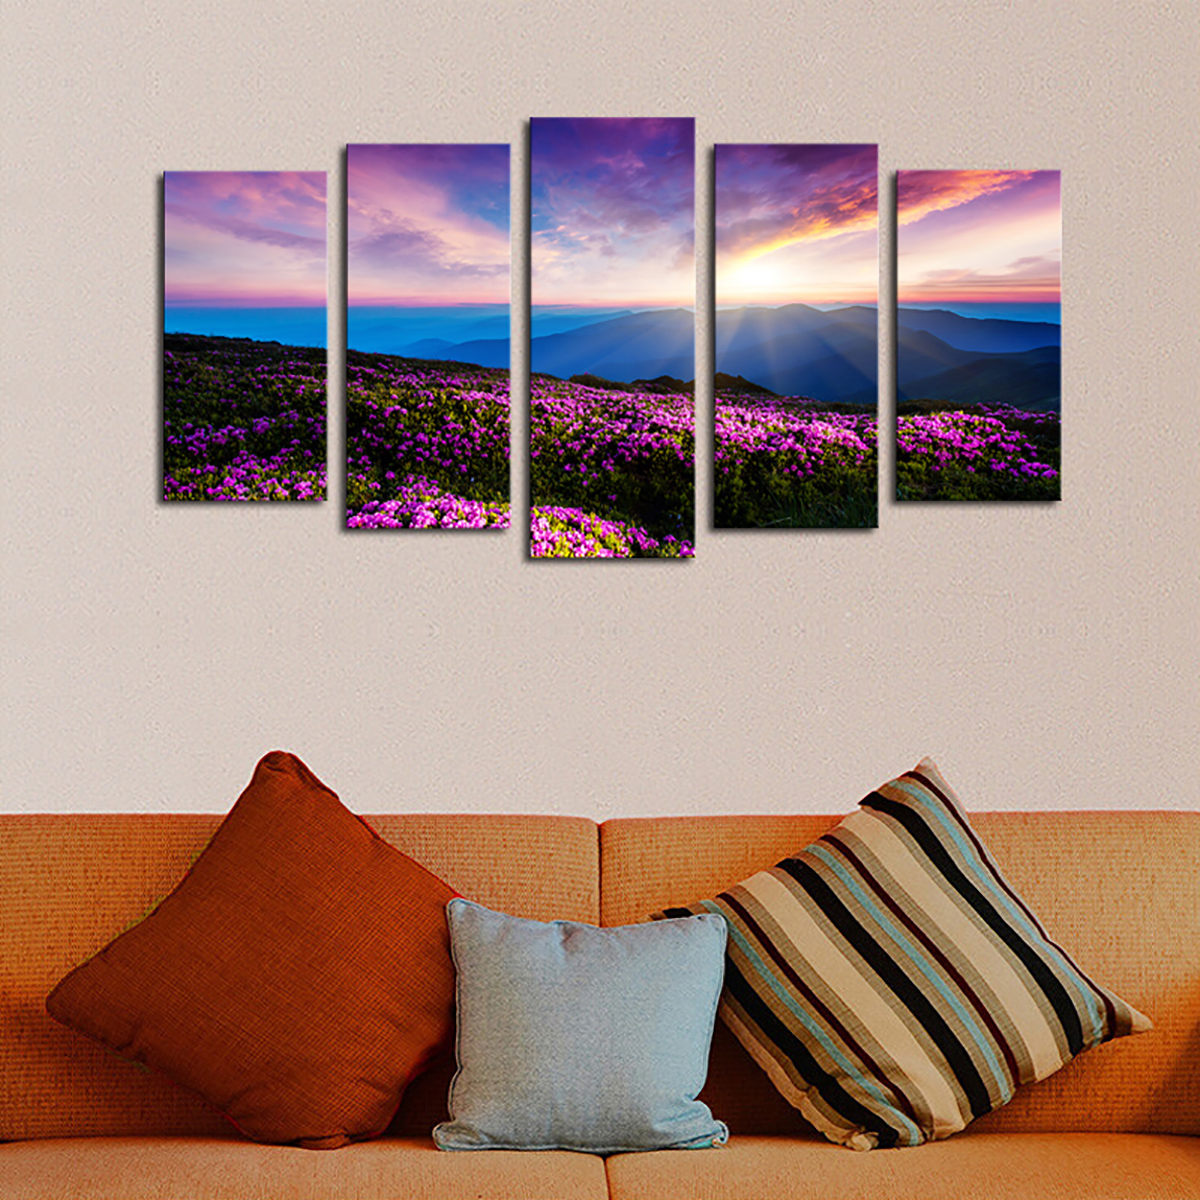 5Pcs-Canvas-Print-Paintings-Scenery-Oil-Painting-Wall-Decorative-Printing-Art-Picture-Frameless-Home-1758668-3